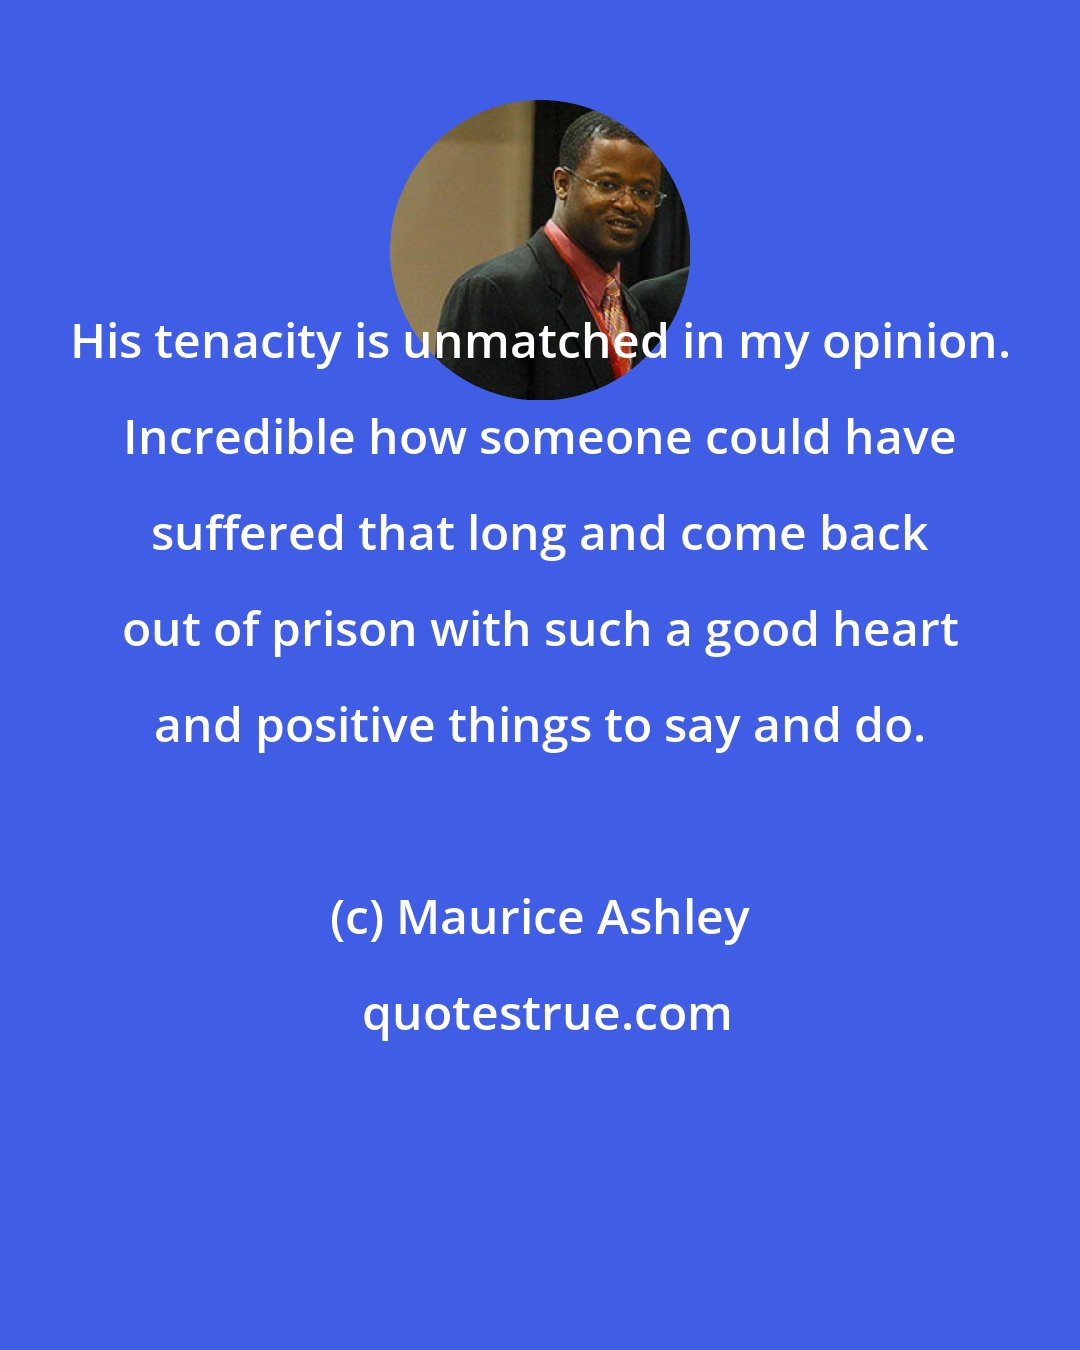 Maurice Ashley: His tenacity is unmatched in my opinion. Incredible how someone could have suffered that long and come back out of prison with such a good heart and positive things to say and do.